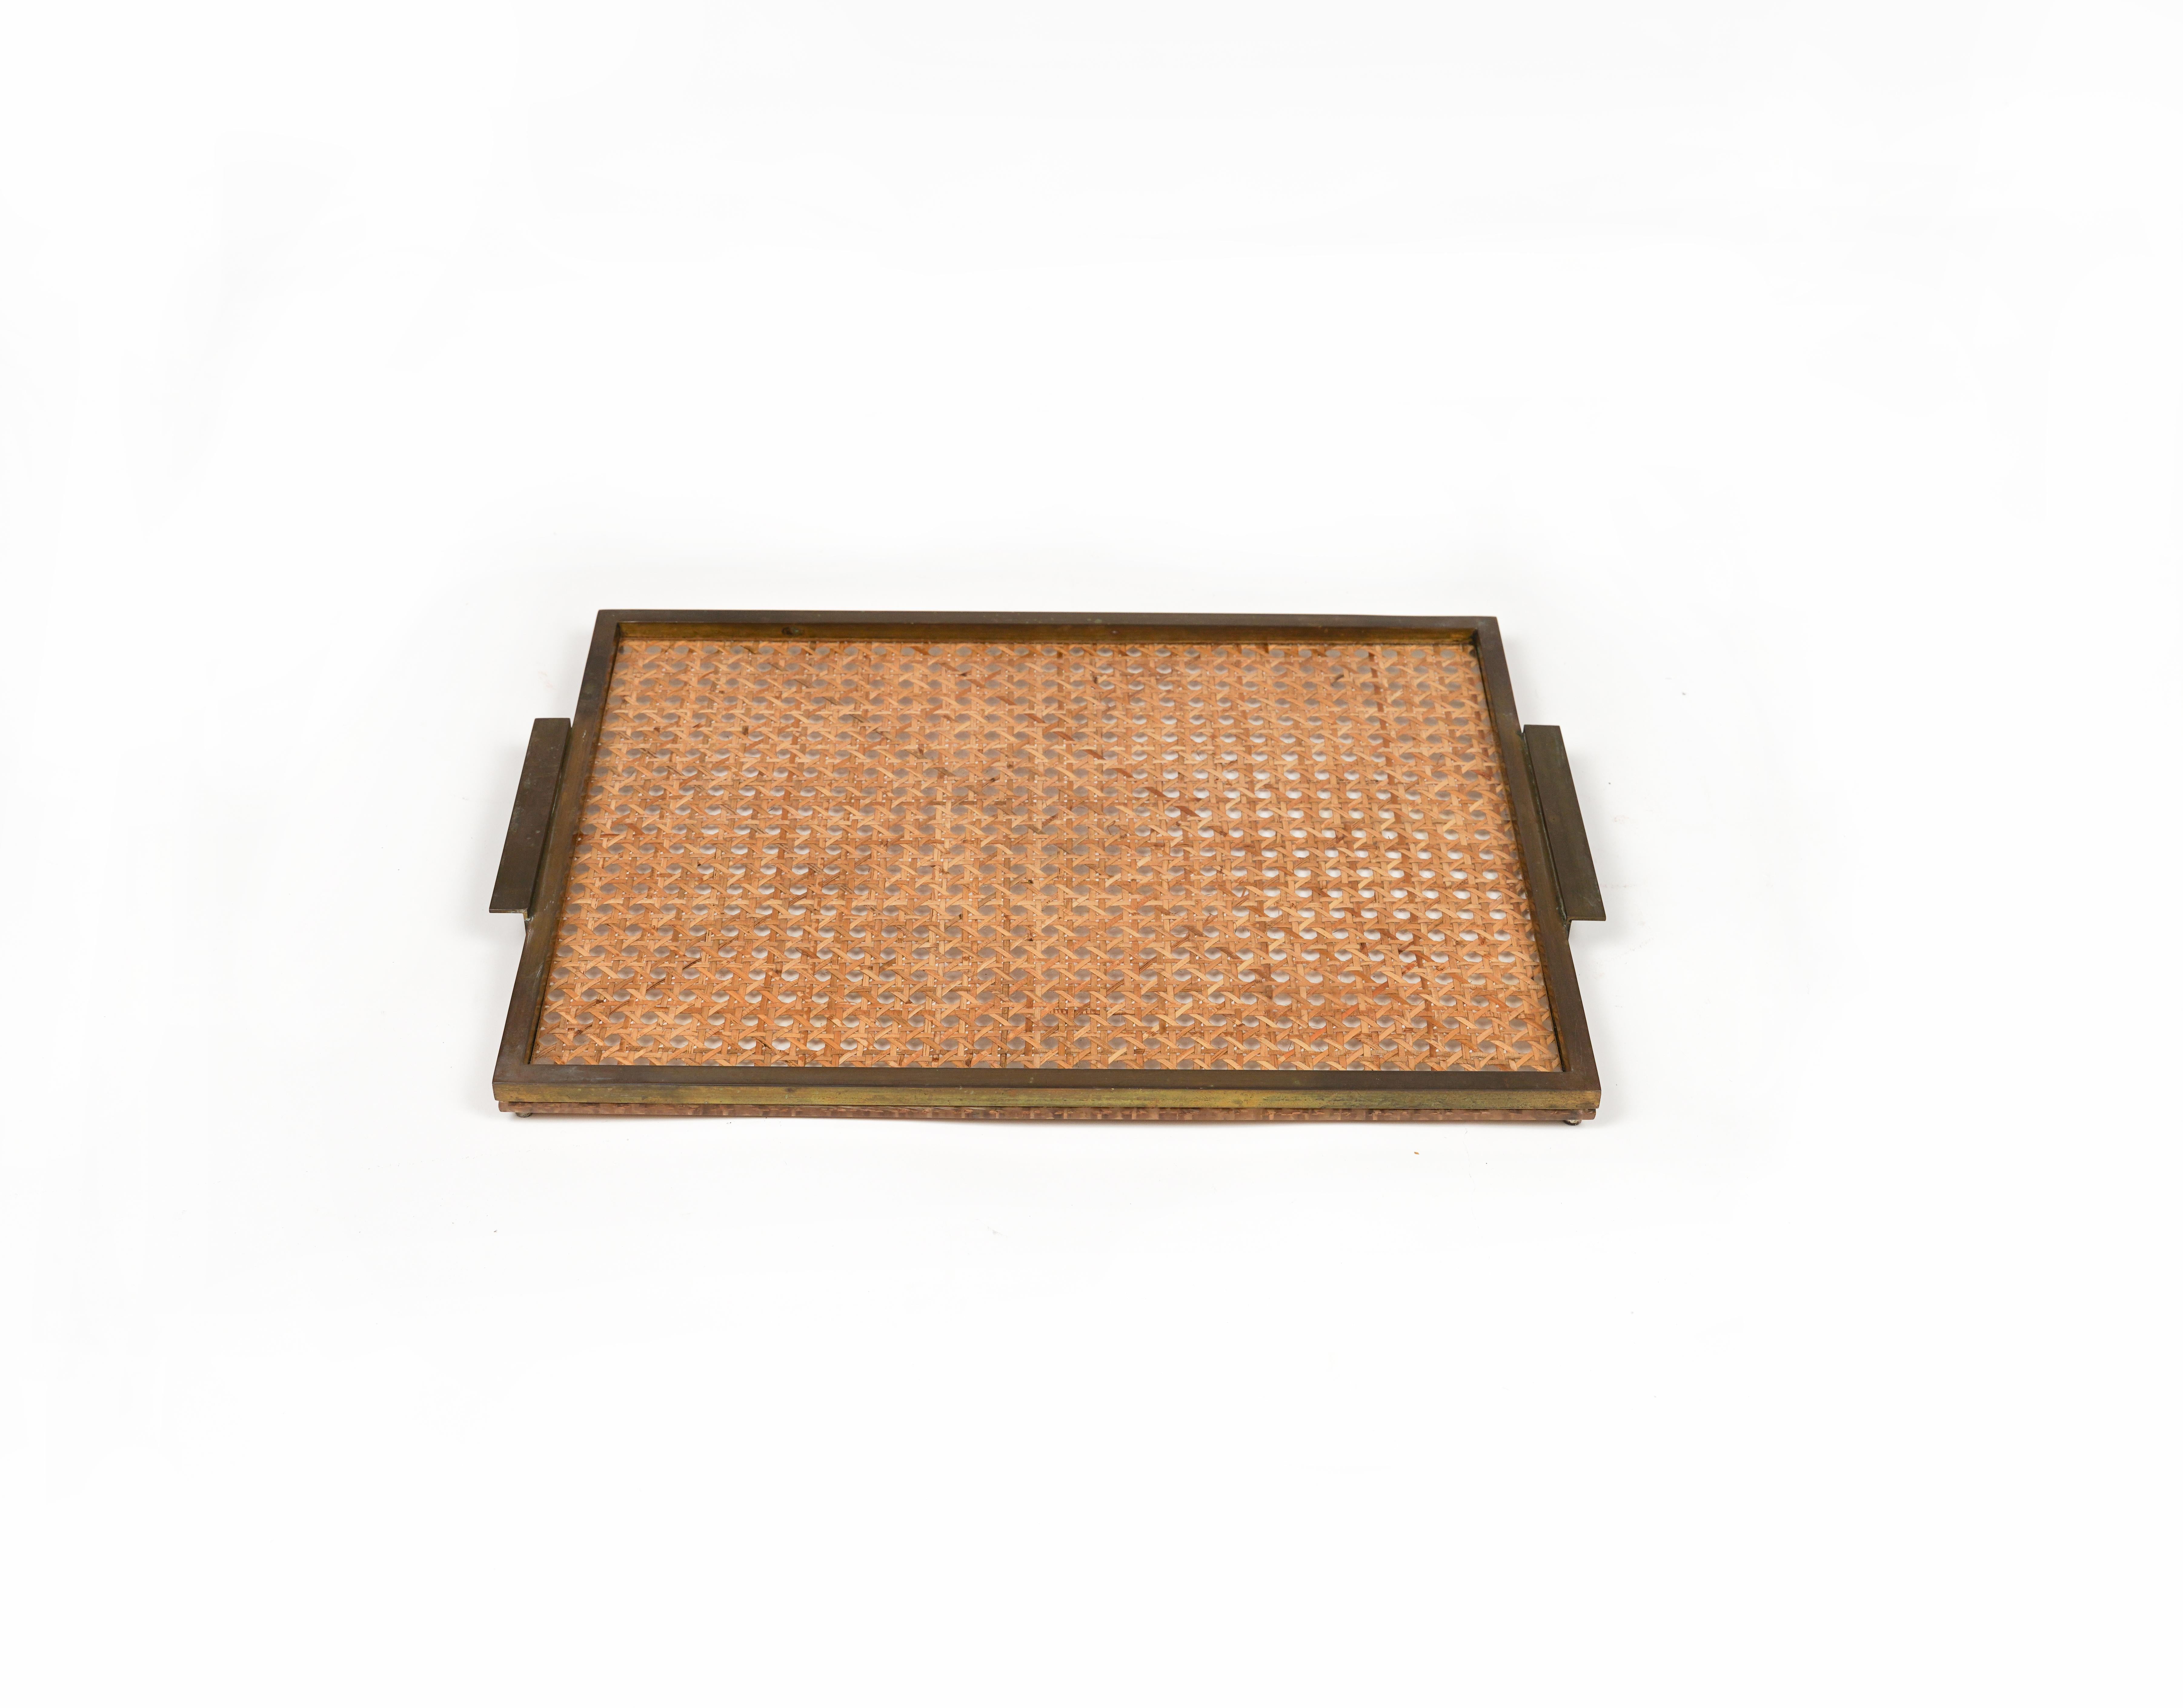 Serving Tray in Lucite, Rattan & Brass Christian Dior Style, Italy, 1970s For Sale 1